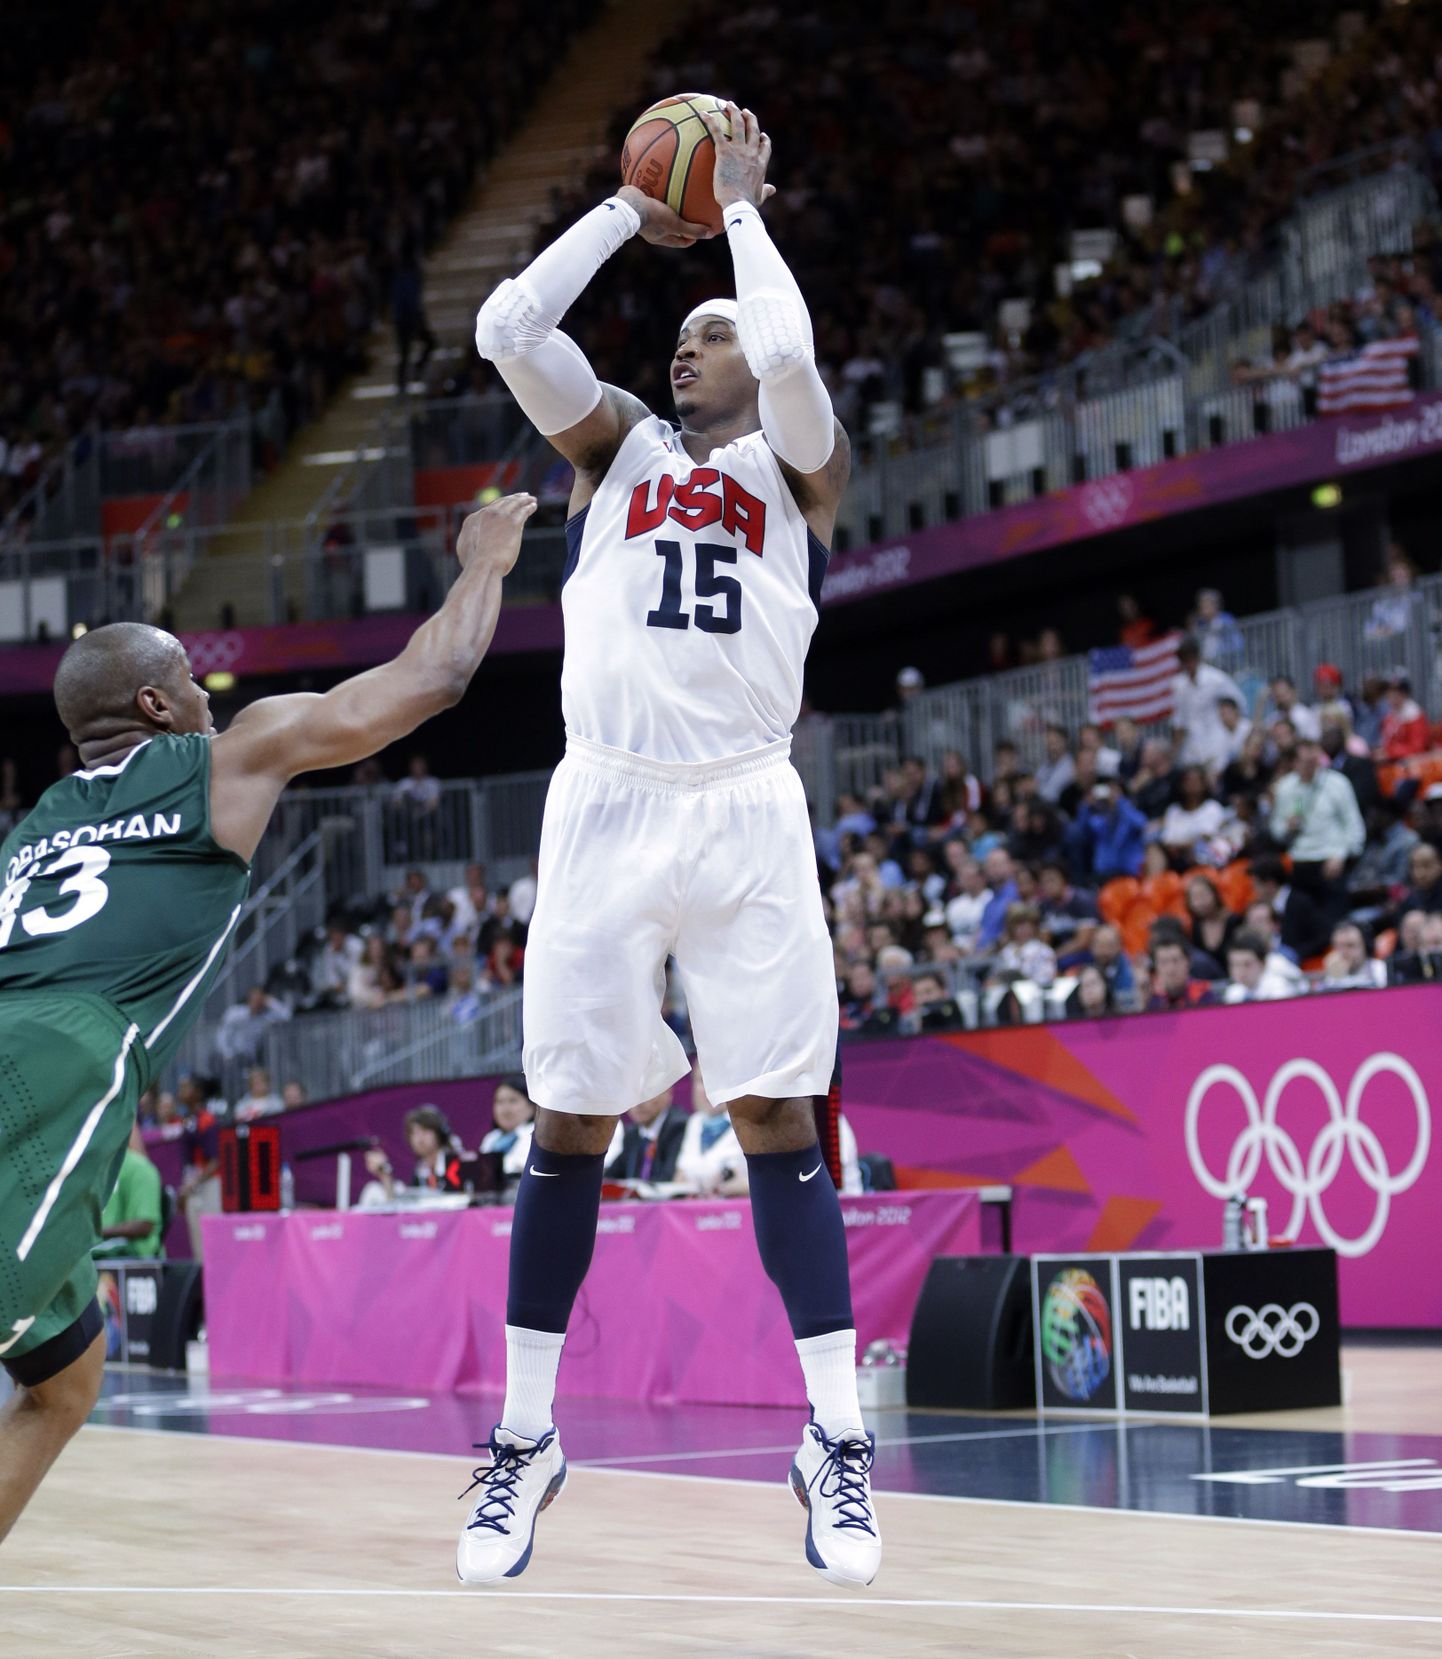 USA's Carmelo Anthony (15) shoot a jumper over Nigeria's Derrick Obasohan (13) during a preliminary men's basketball game at the 2012 Summer Olympics, Thursday, Aug. 2, 2012, in London. (AP Photo/Eric Gay) / SCANPIX Code: 436